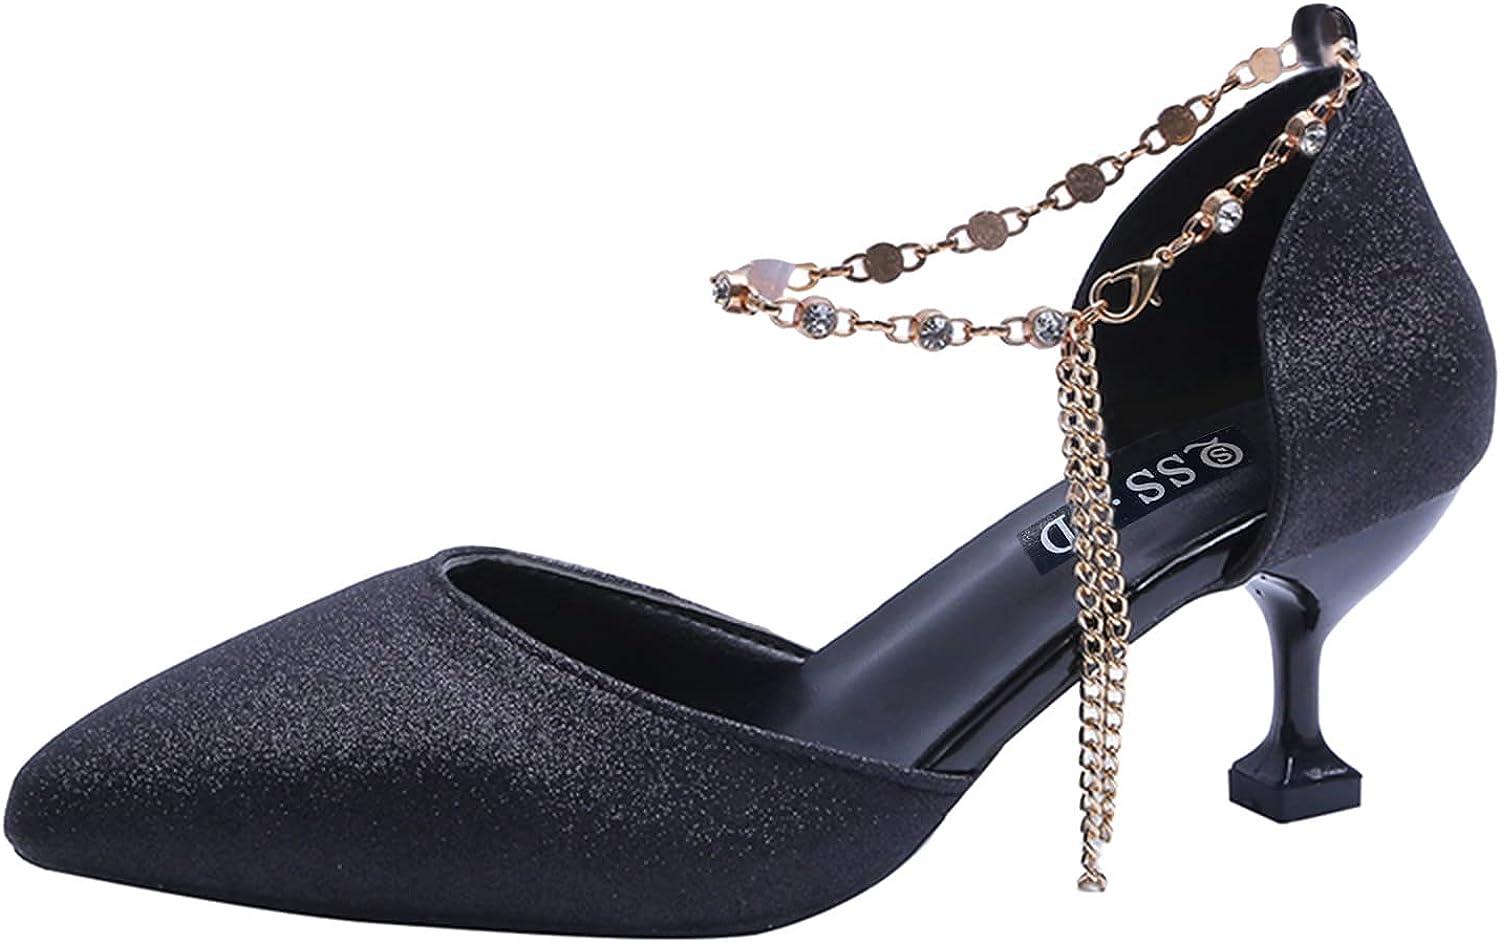 Designer Rhinestone Ankle Strap Sandals For Women Sexy Black High Heel  Embellished Bridal Shoes With Box From Cplv1, $23.53 | DHgate.Com